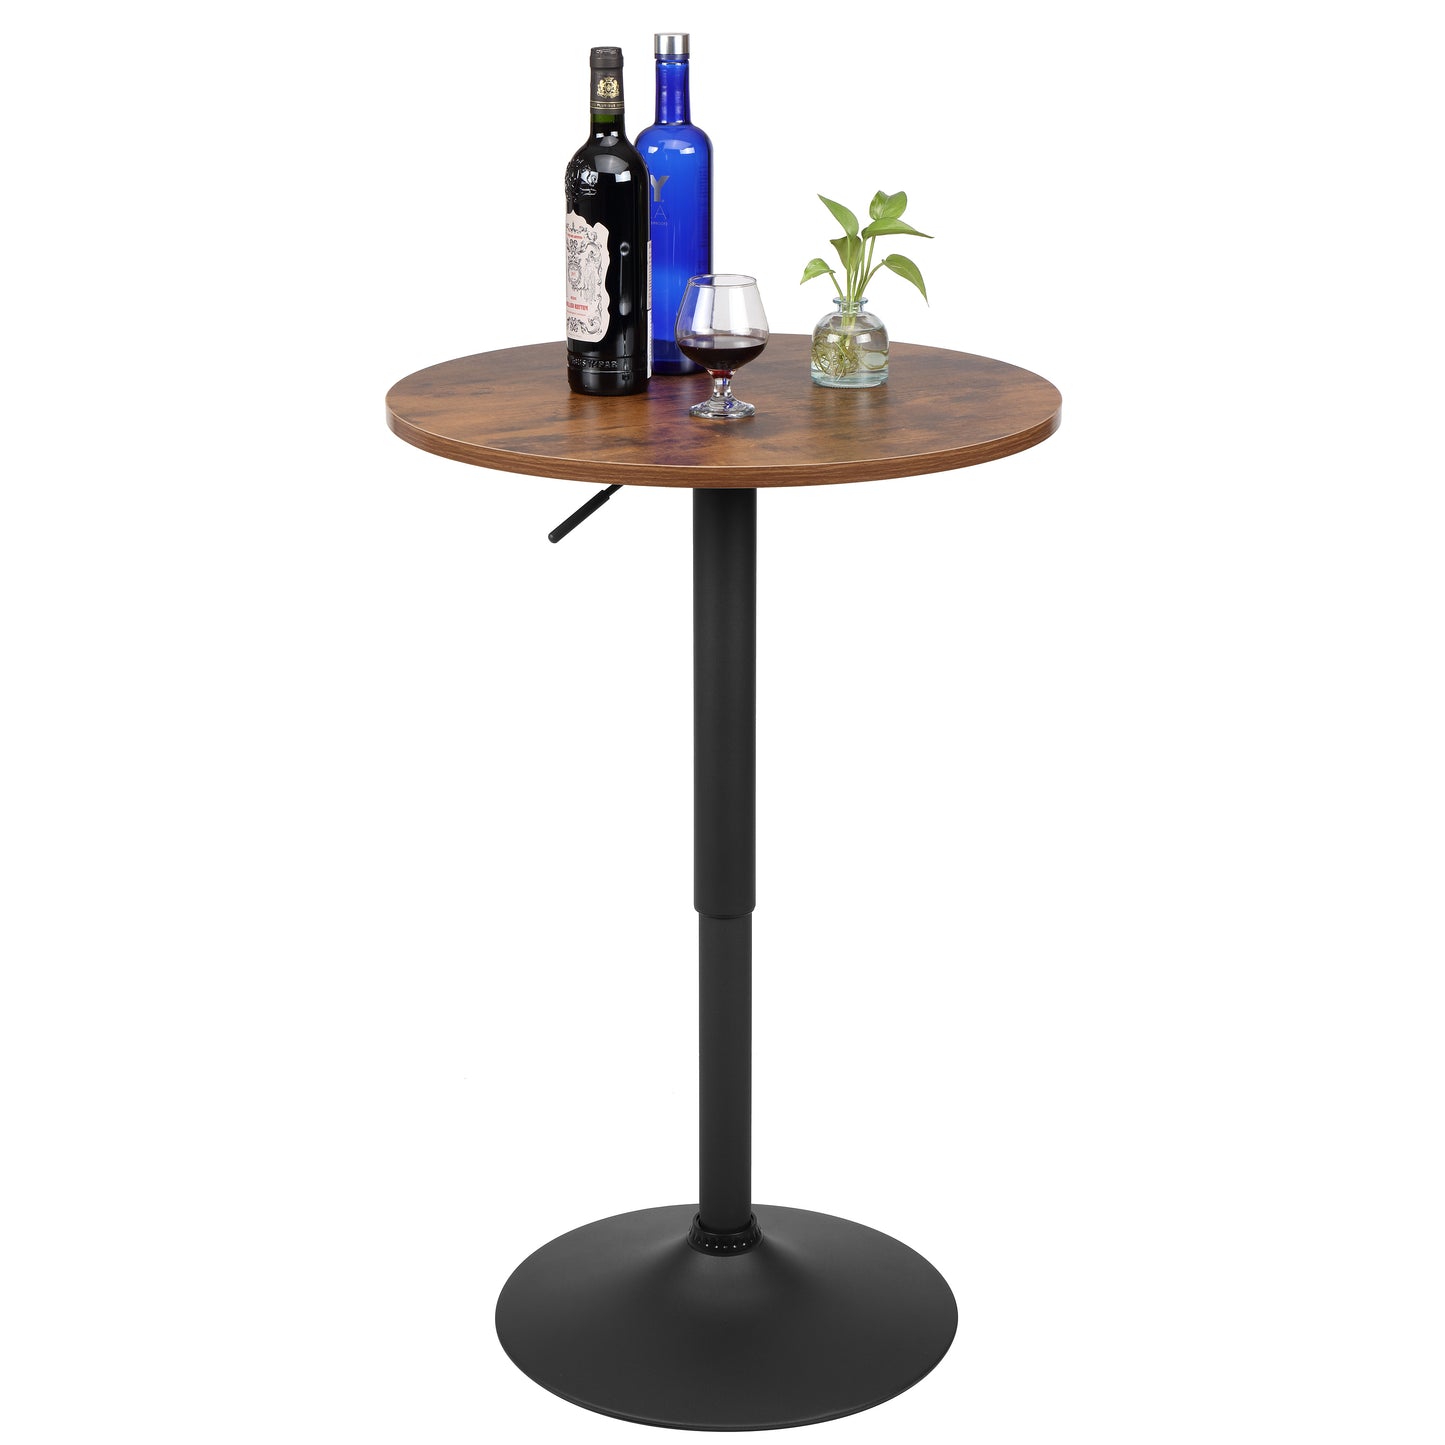 Finnhomy 23.6inches Round Cocktail Bar Table with Metal Base, Tall Bistro Pub Table, Adjustable 27.9''-36.2'' Counter Bar Height for Kitchen, Dining Room, Living Room, Easy Assembly, Rustic Brown，F20BT71T9542